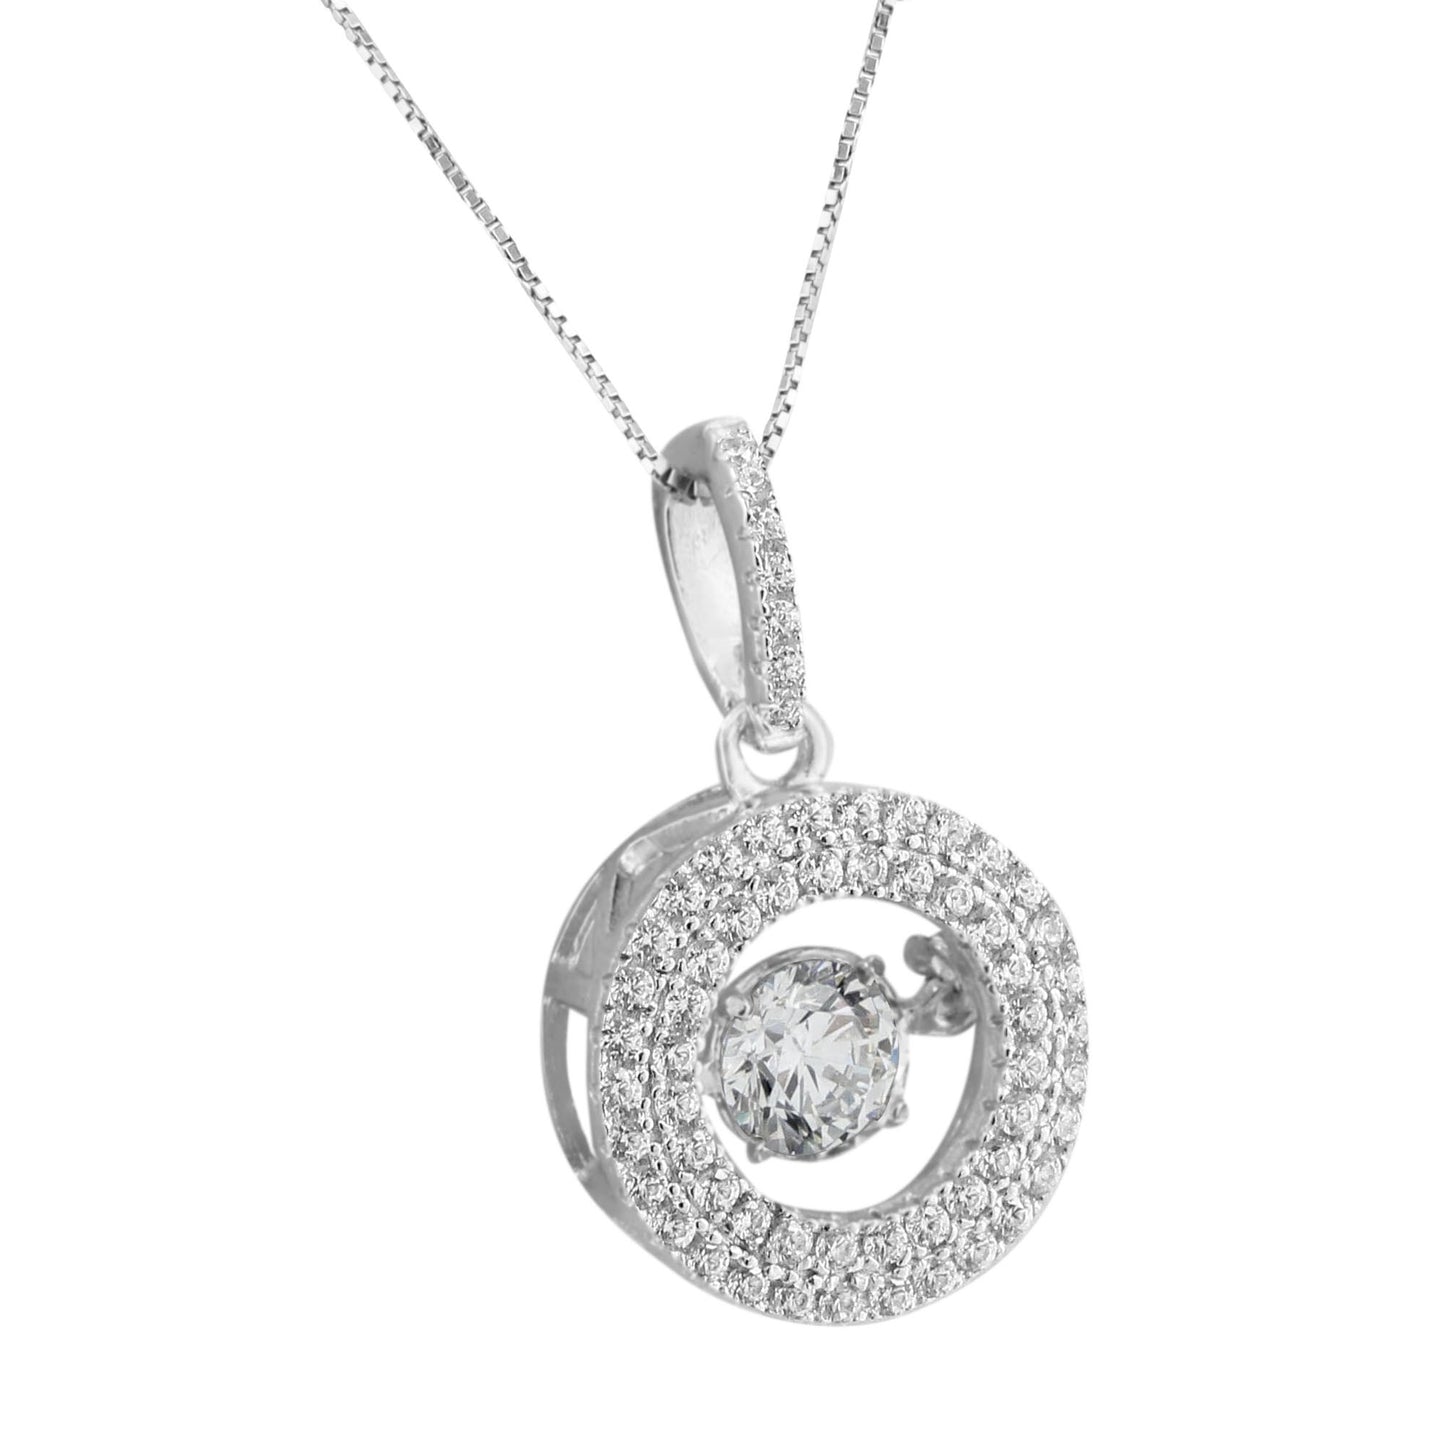 Halo Design Round Pendant Simulated Diamonds Sterling Silver Necklace Solitaire